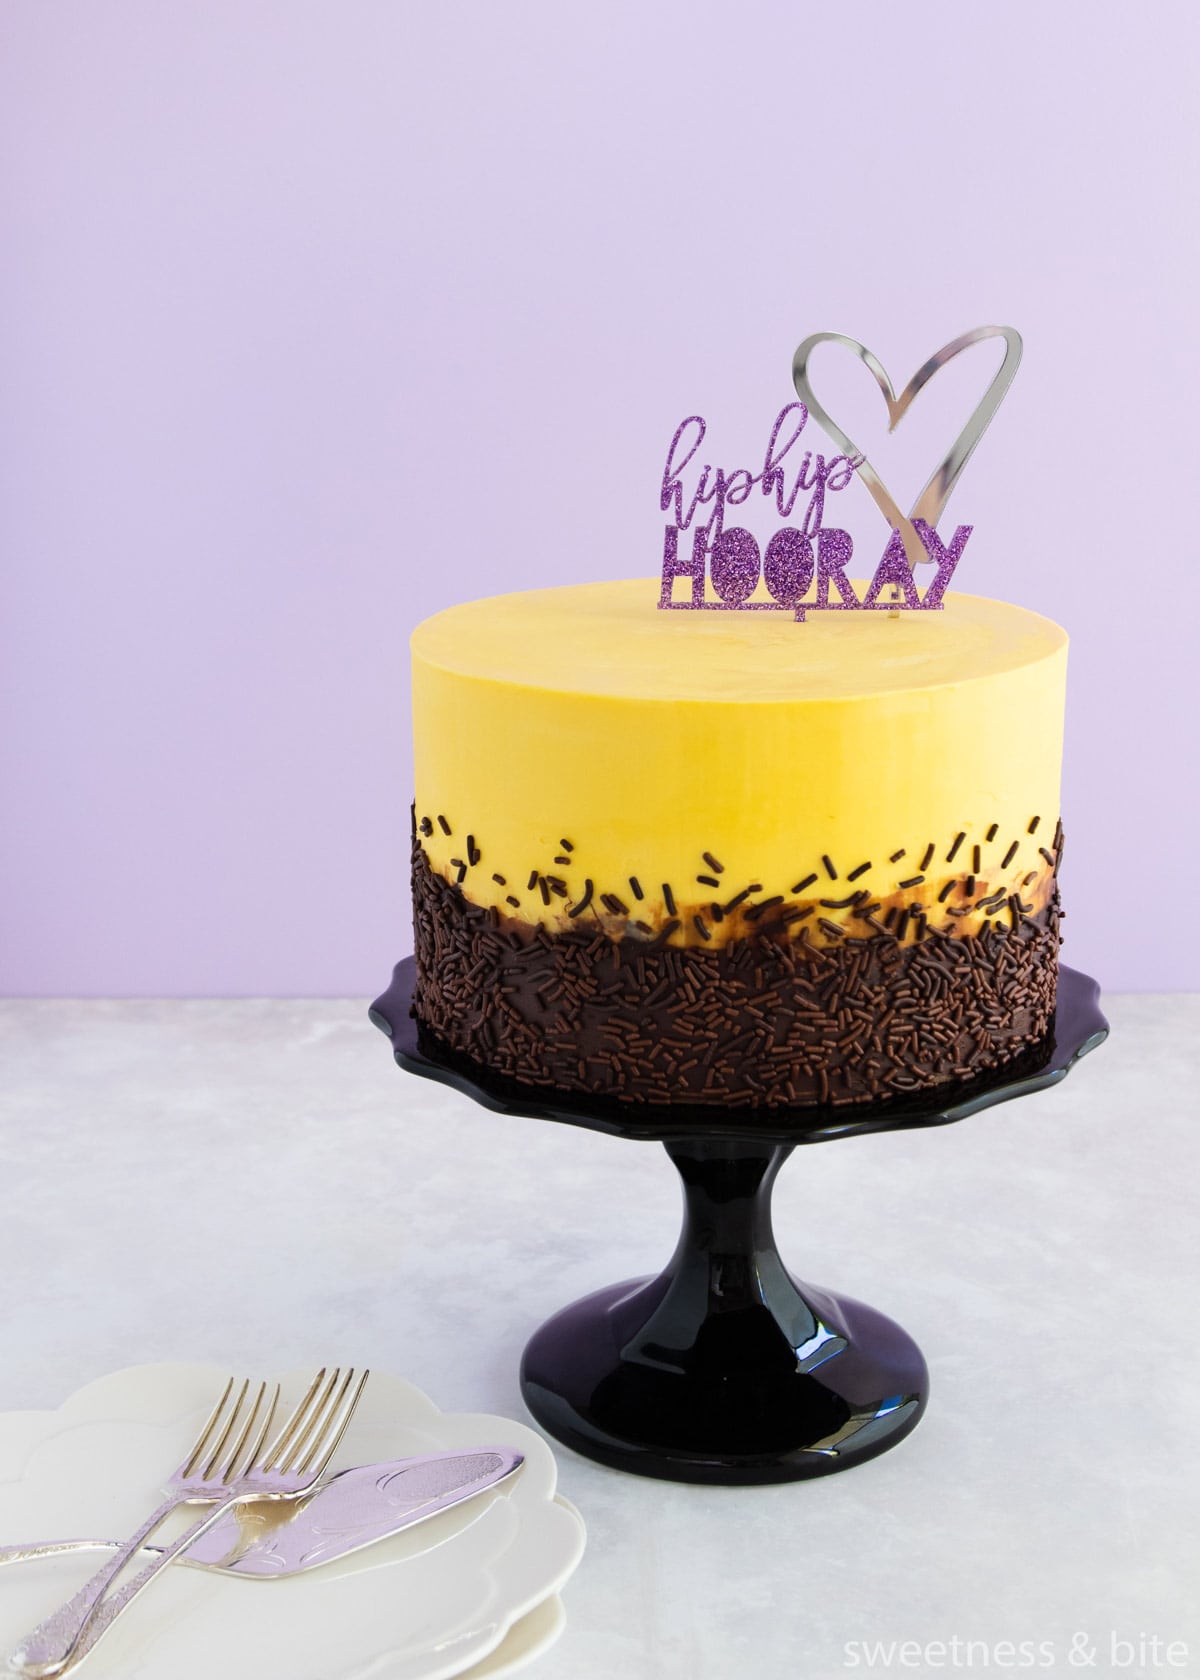 A cake with yellow and dark chocolate ganache with chocolate sprinkles and a purple 